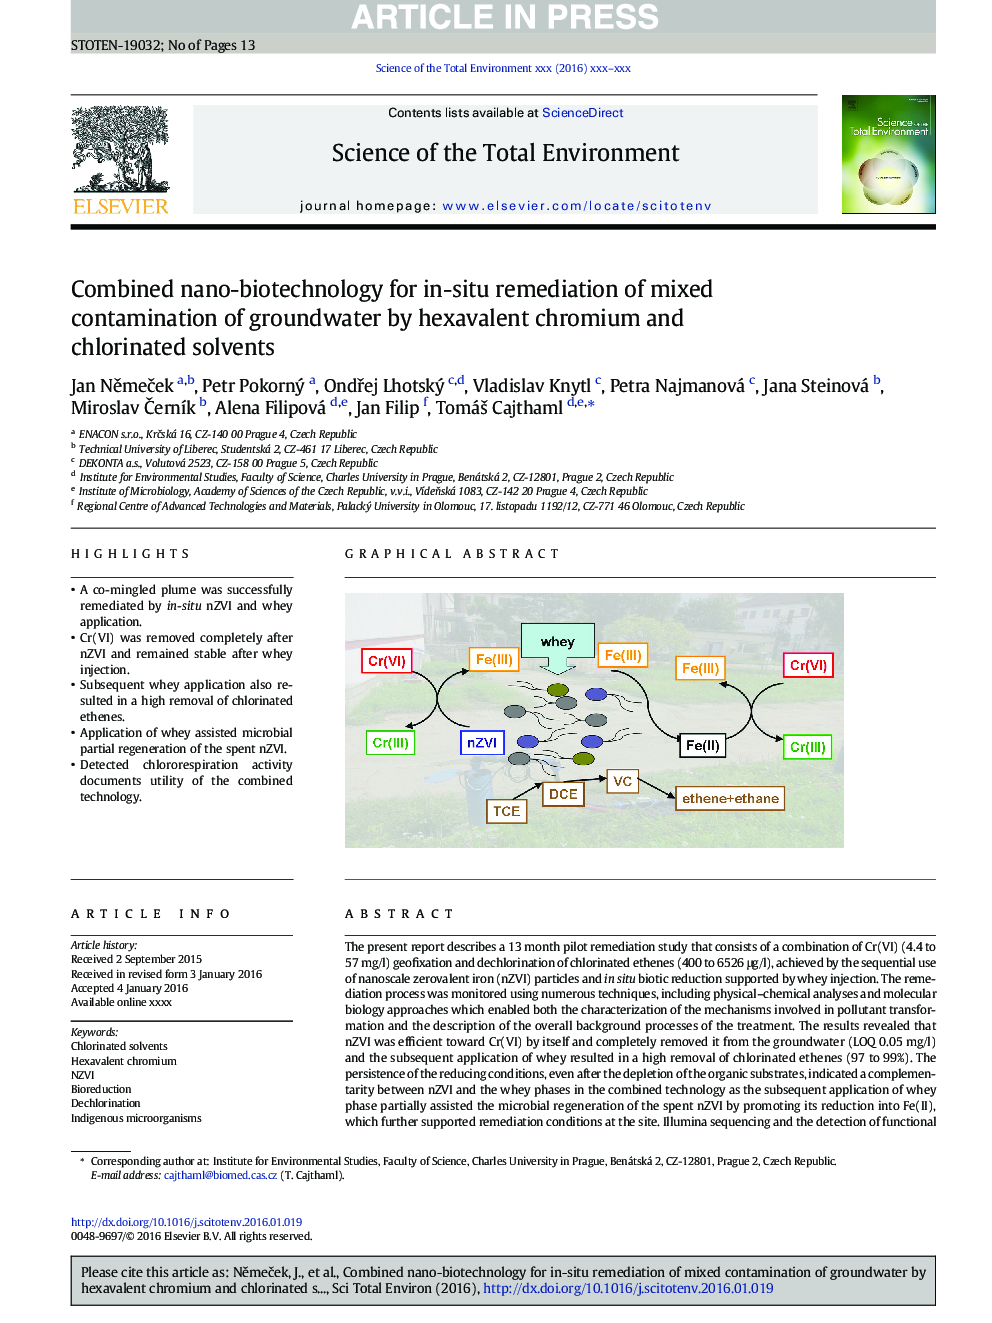 Combined nano-biotechnology for in-situ remediation of mixed contamination of groundwater by hexavalent chromium and chlorinated solvents